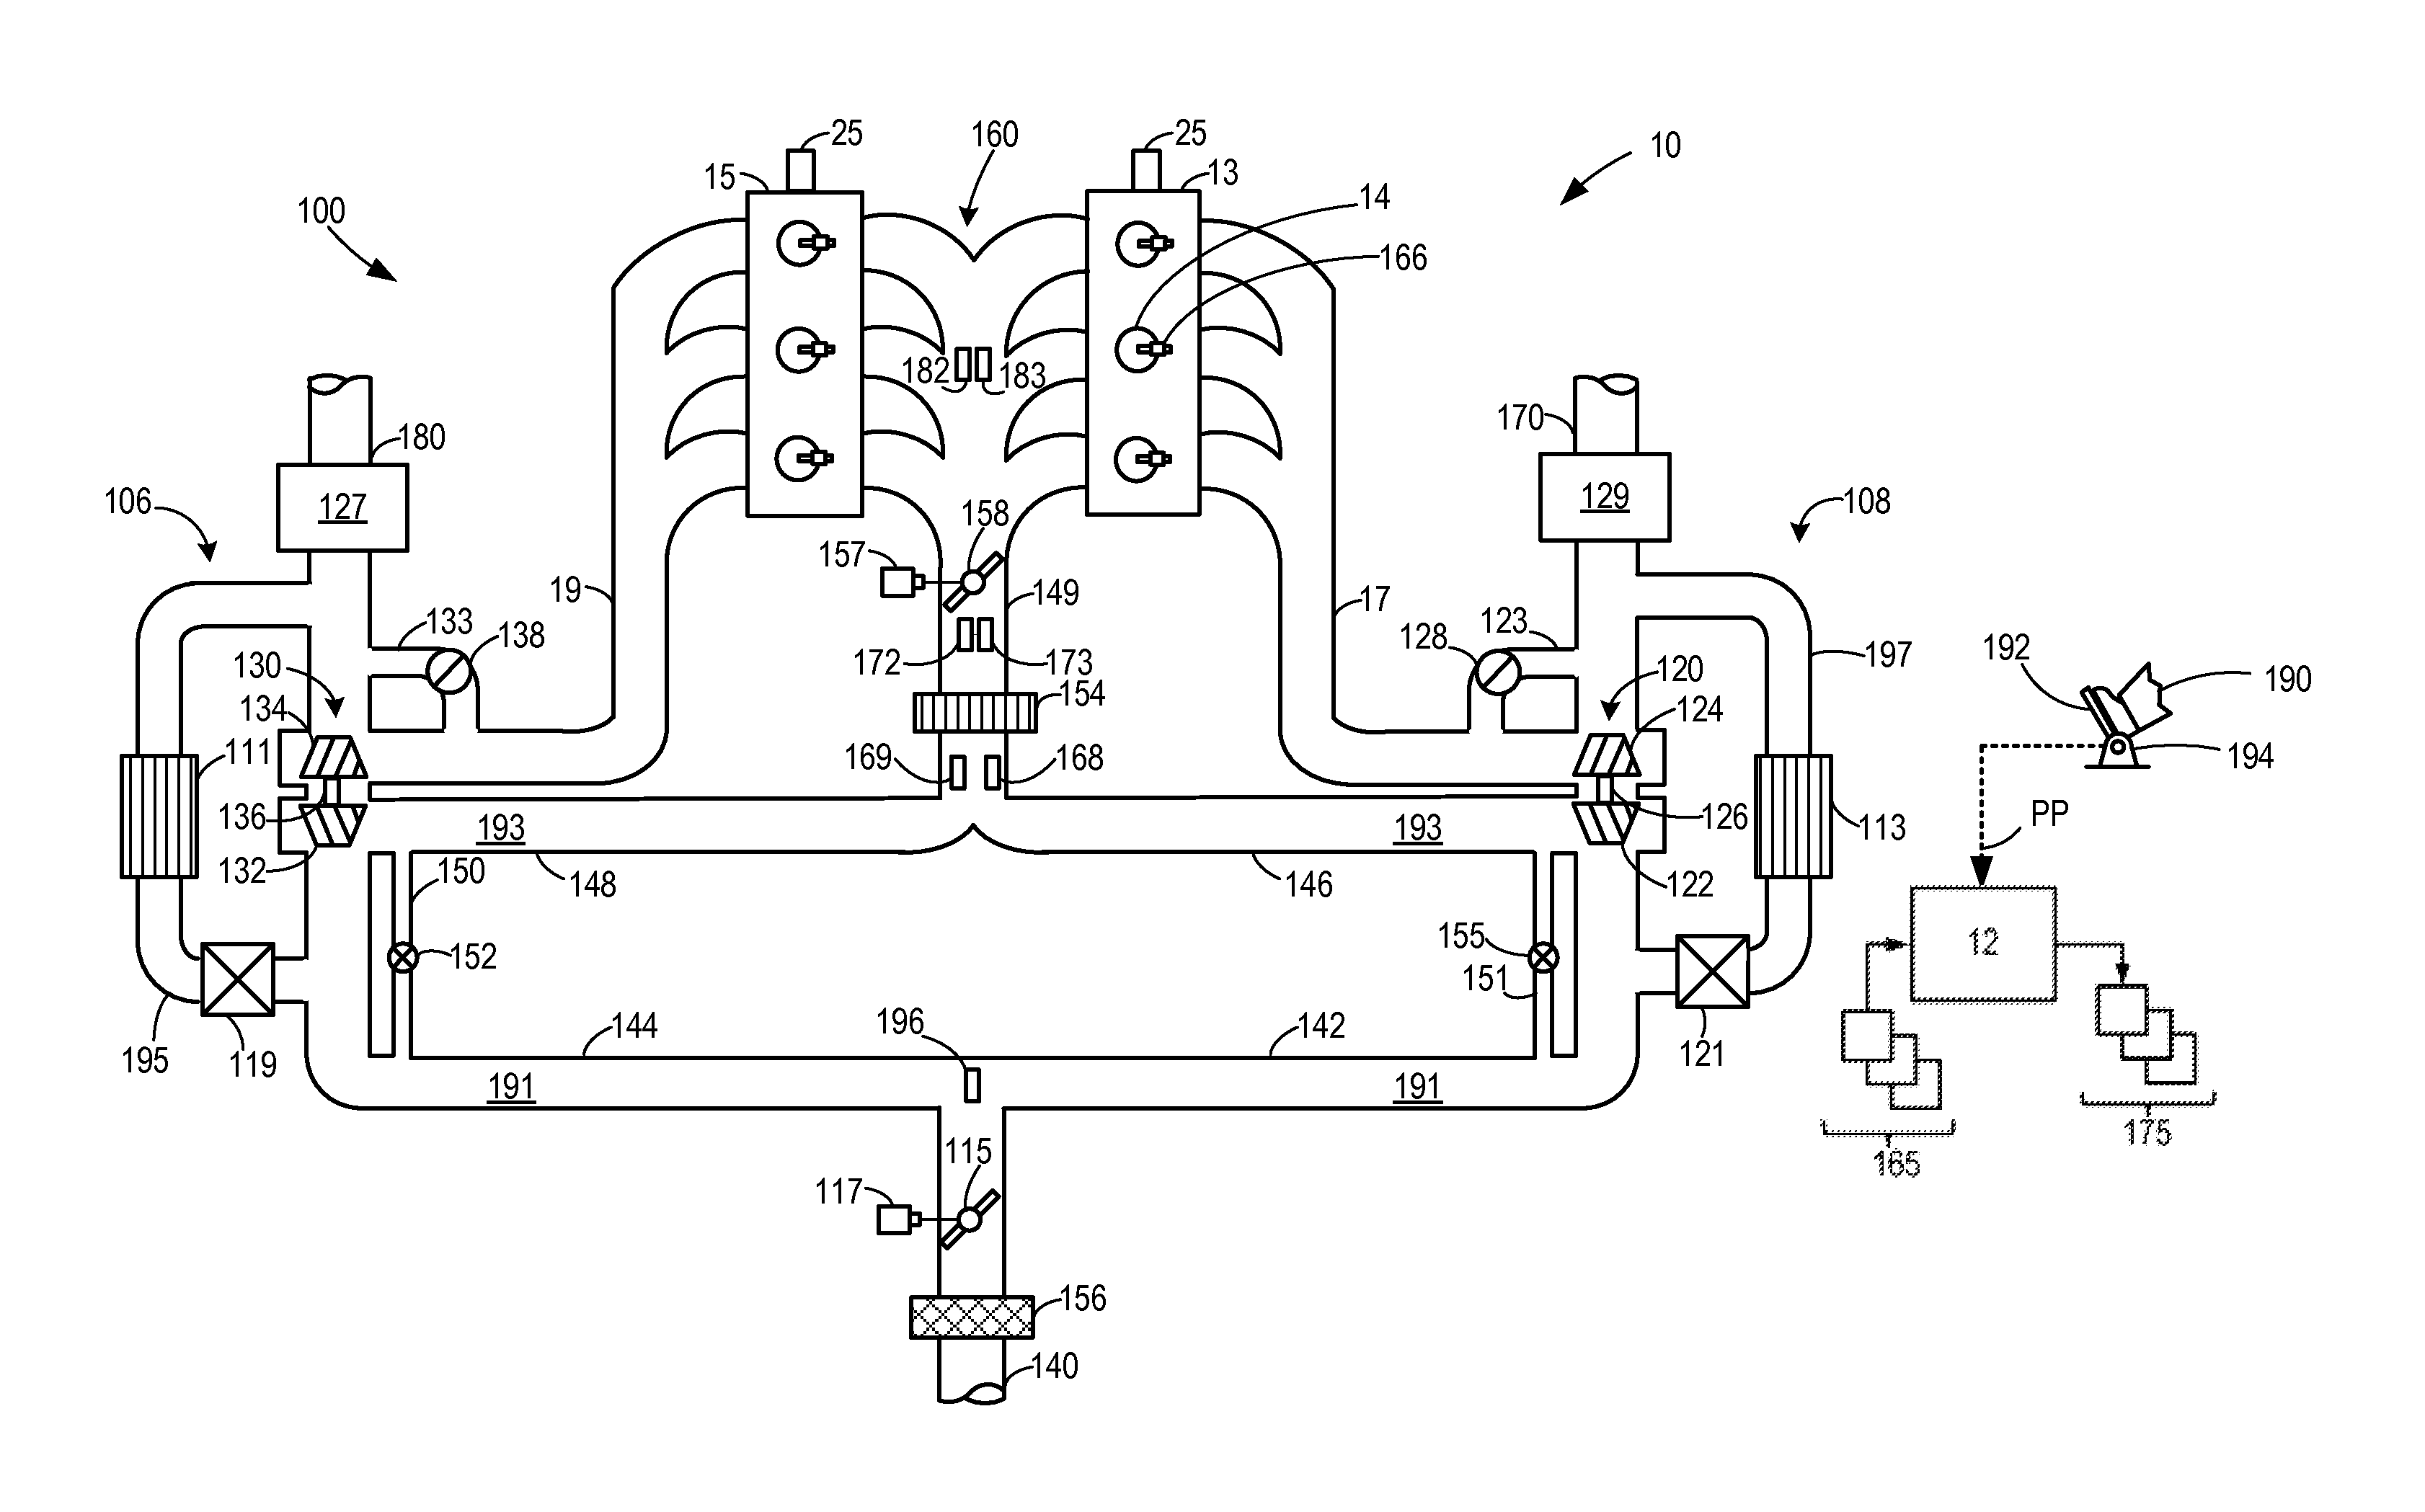 Low-pressure egr control during compressor bypass valve operation